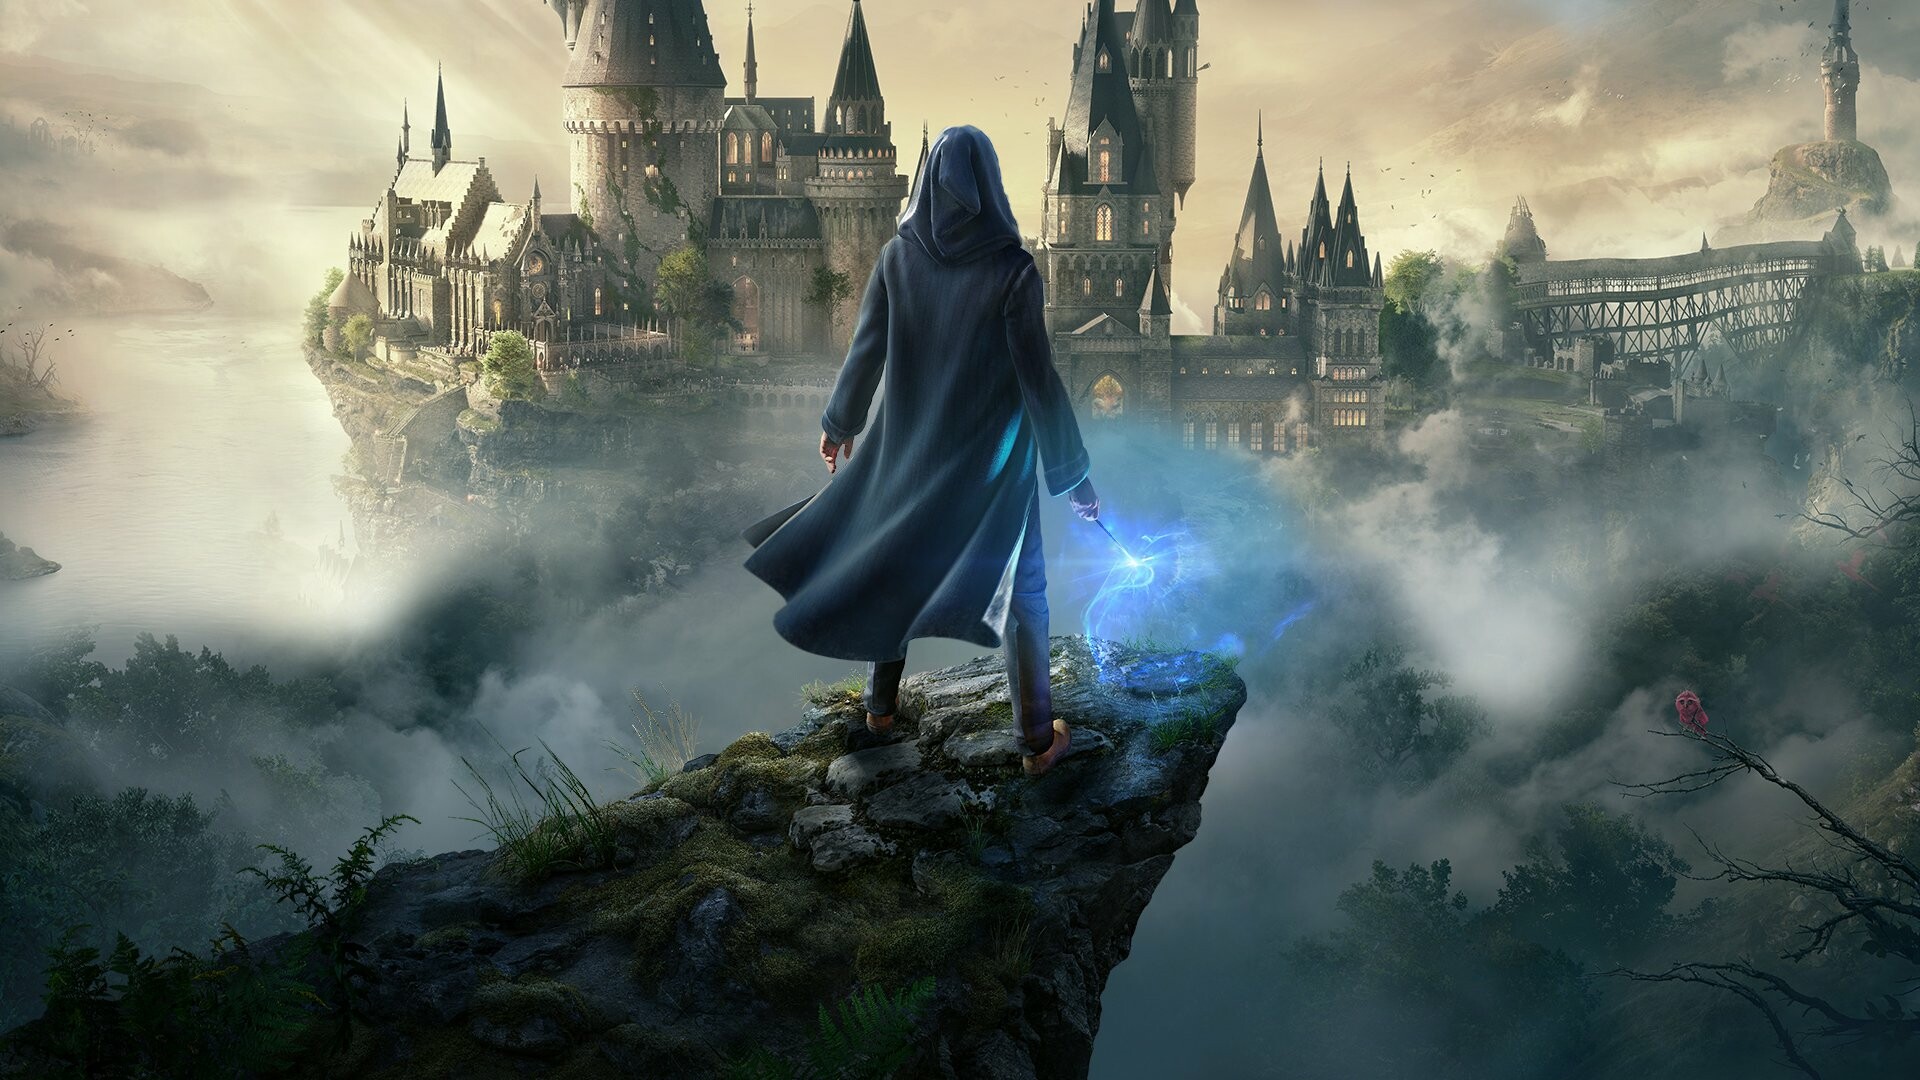 Hogwarts Legacy: Published by Warner Bros. Interactive Entertainment under the Portkey Games label. 1920x1080 Full HD Wallpaper.